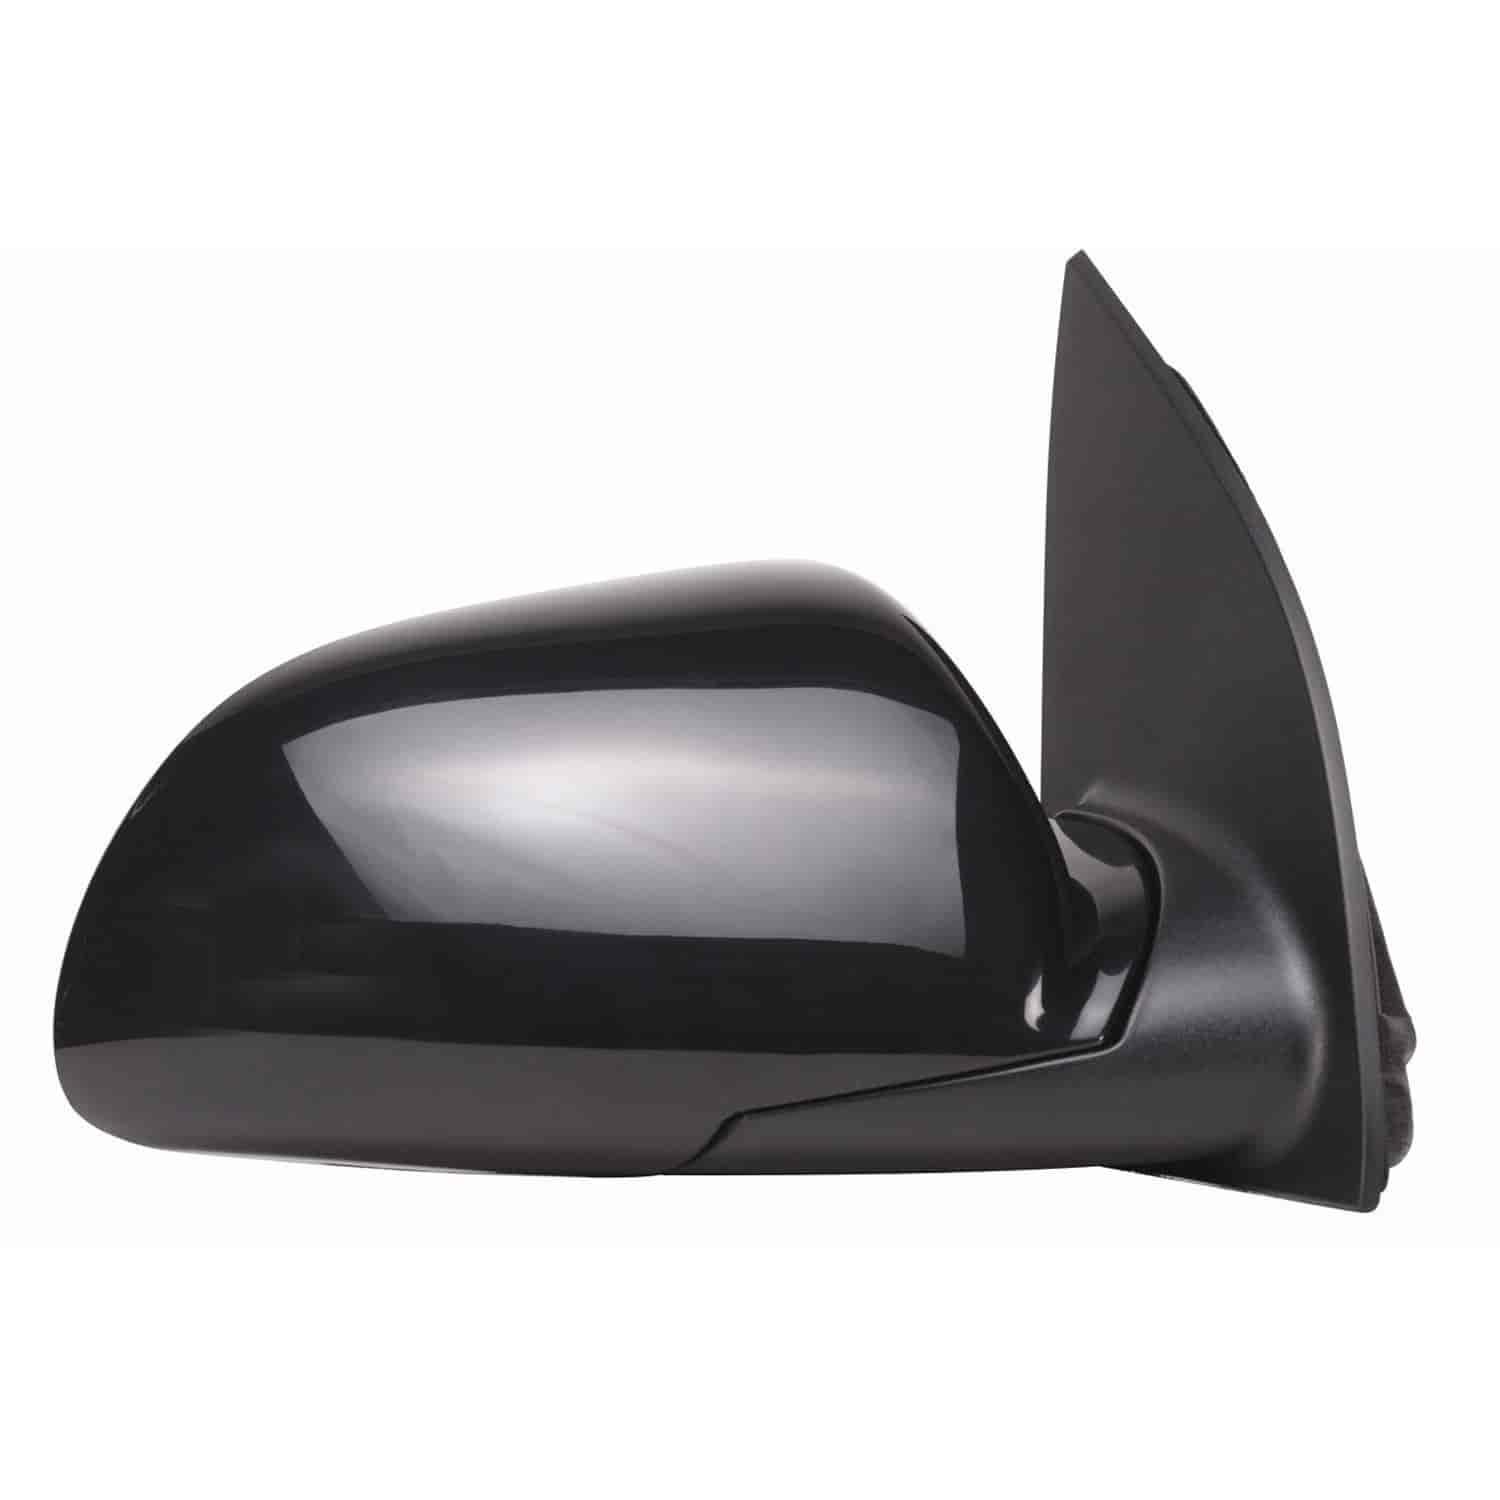 OEM Style Replacement mirror for 04-09 Saturn Vue ; Chevy Equinox Pontiac Torrent passenger side mir